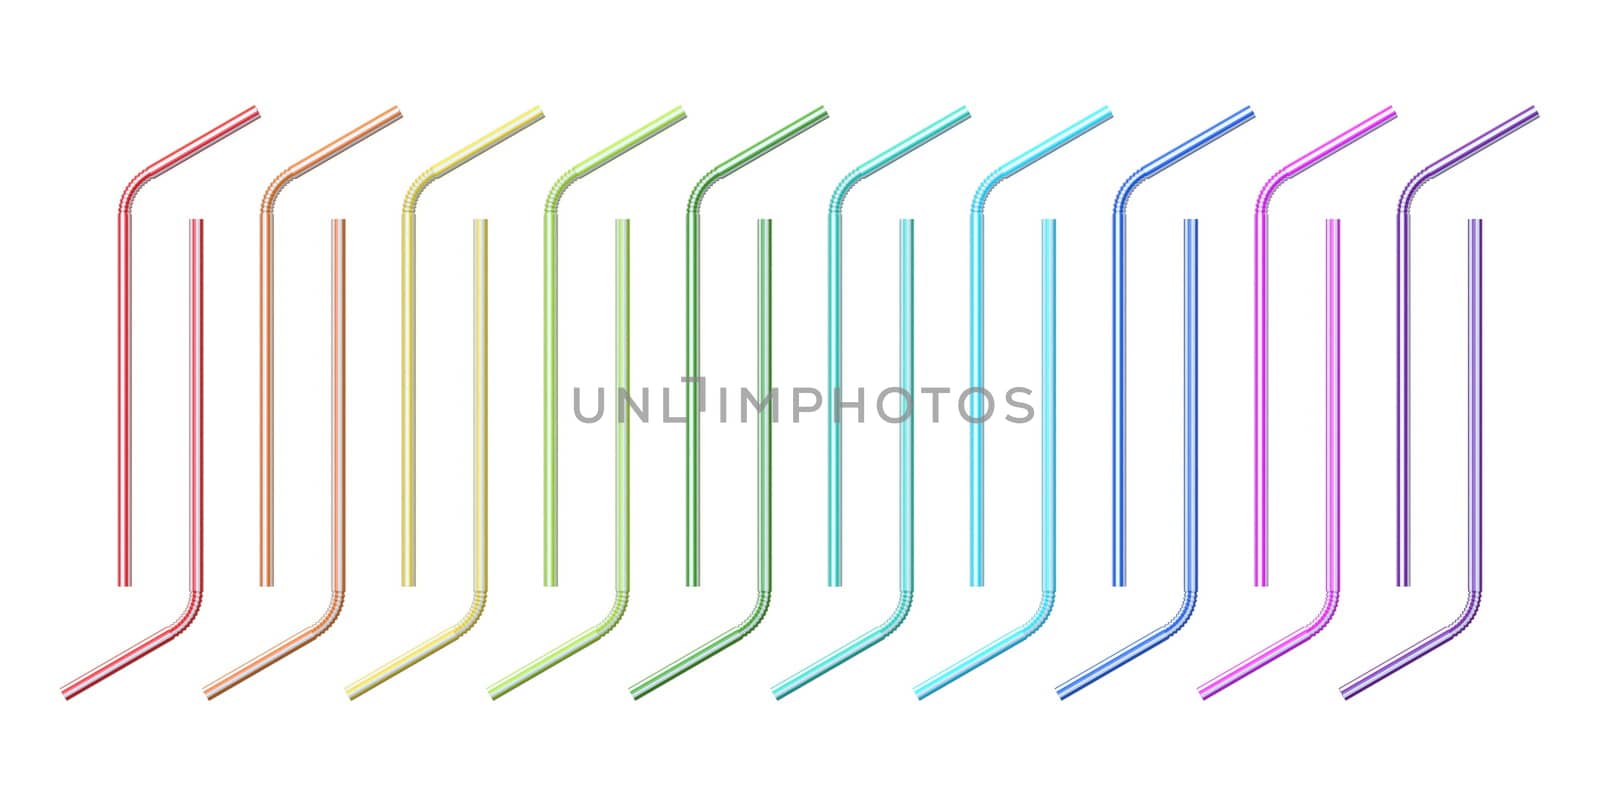 Colorful drinking straw collection 3D render illustration isolated on white background